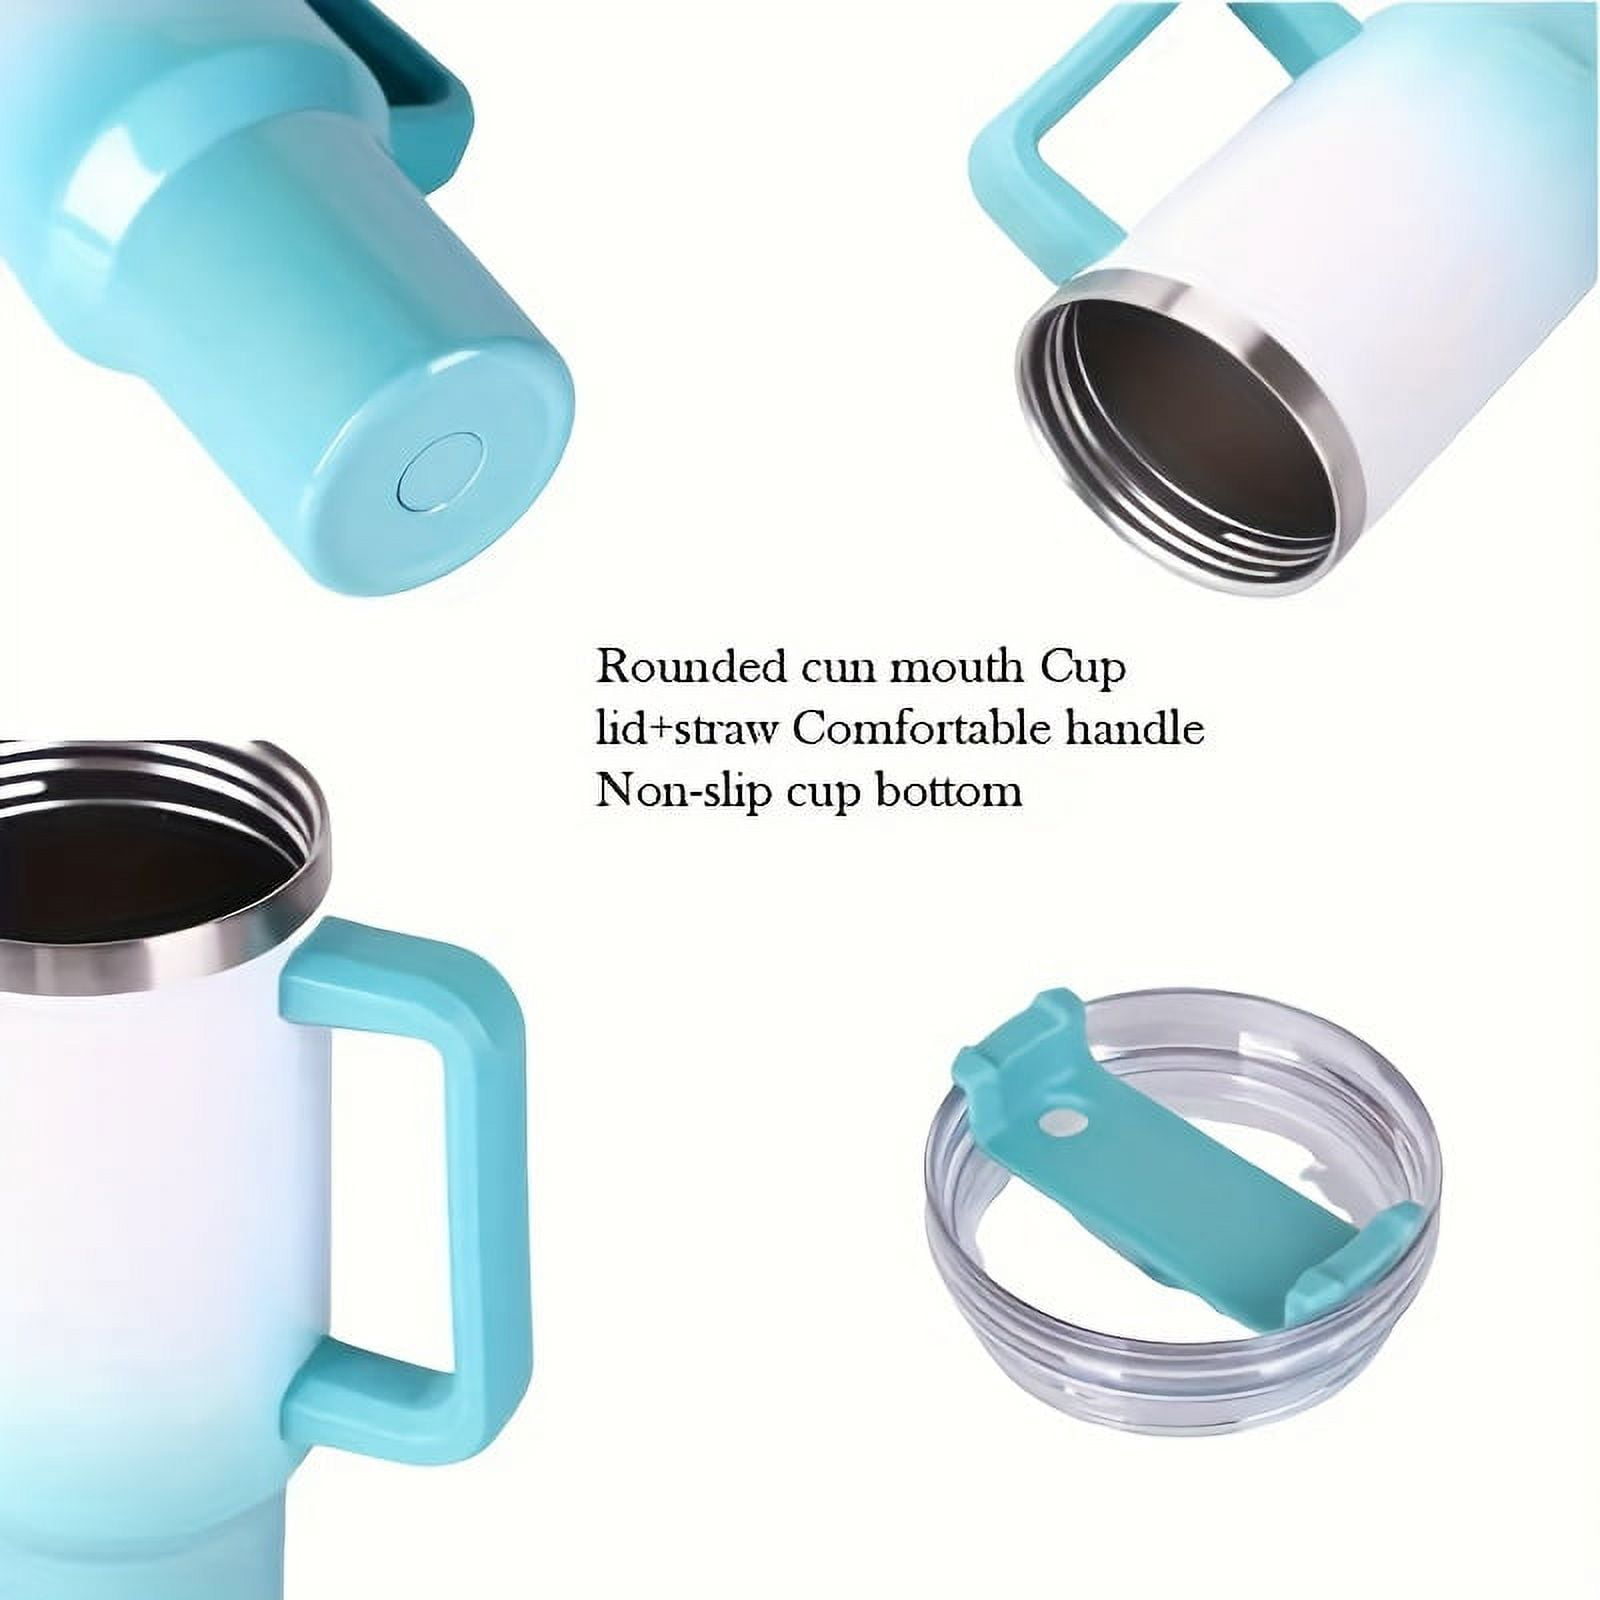 1200ml/40oz Handle & Straw Cold Drink Cup Stainless Steel Leakproof Tumbler  With Handle, Dustproof Lid & Reusable Straw For Car, Traveling, Camping,  Outdoor Activities